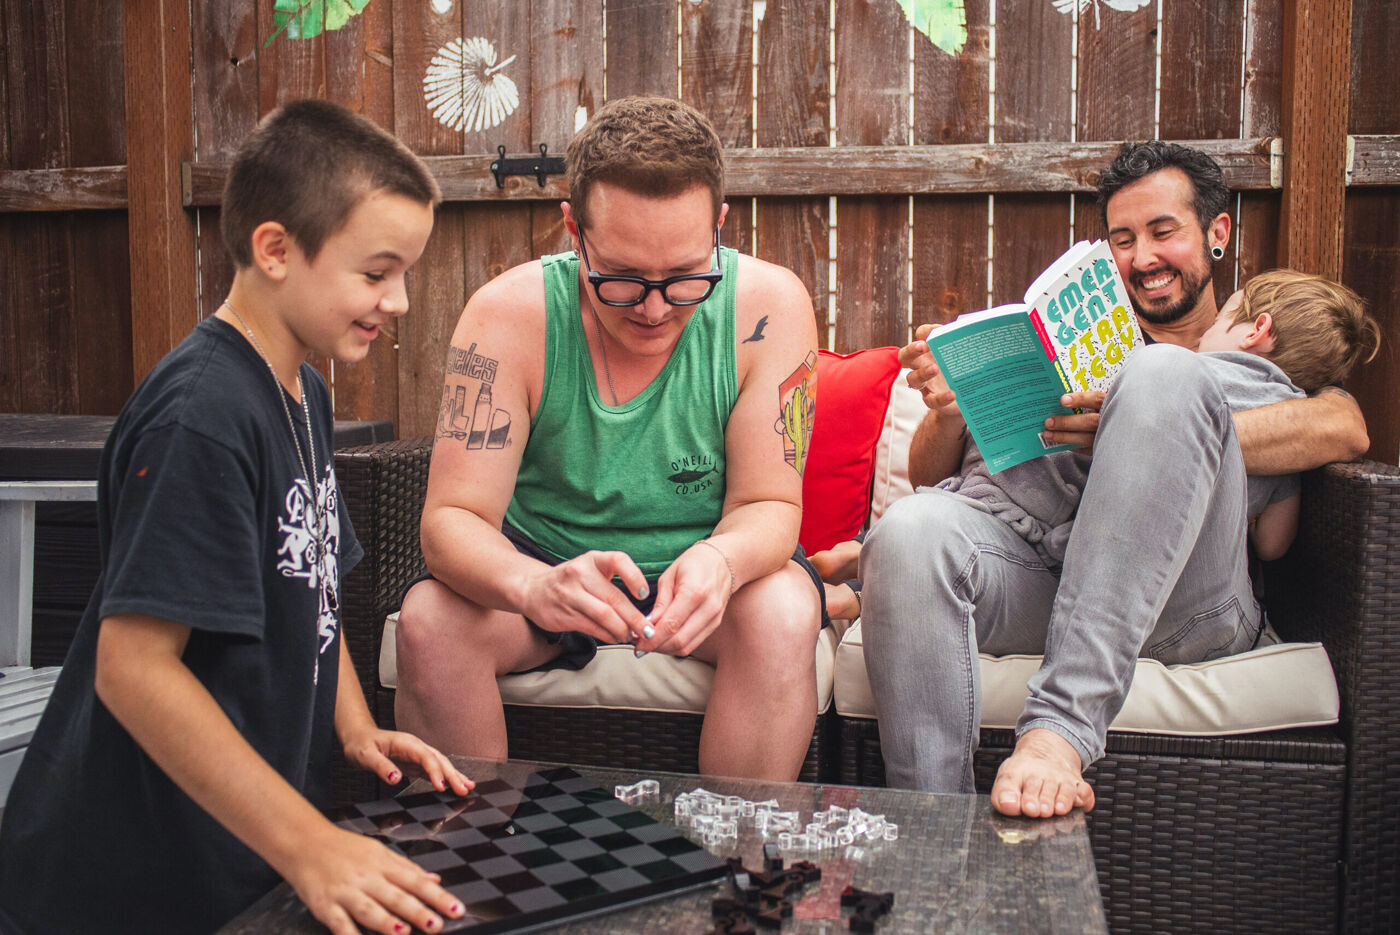 Hailey and Biff set up for a game of chess in the backyard. Photo: Mark Pratt-Russum